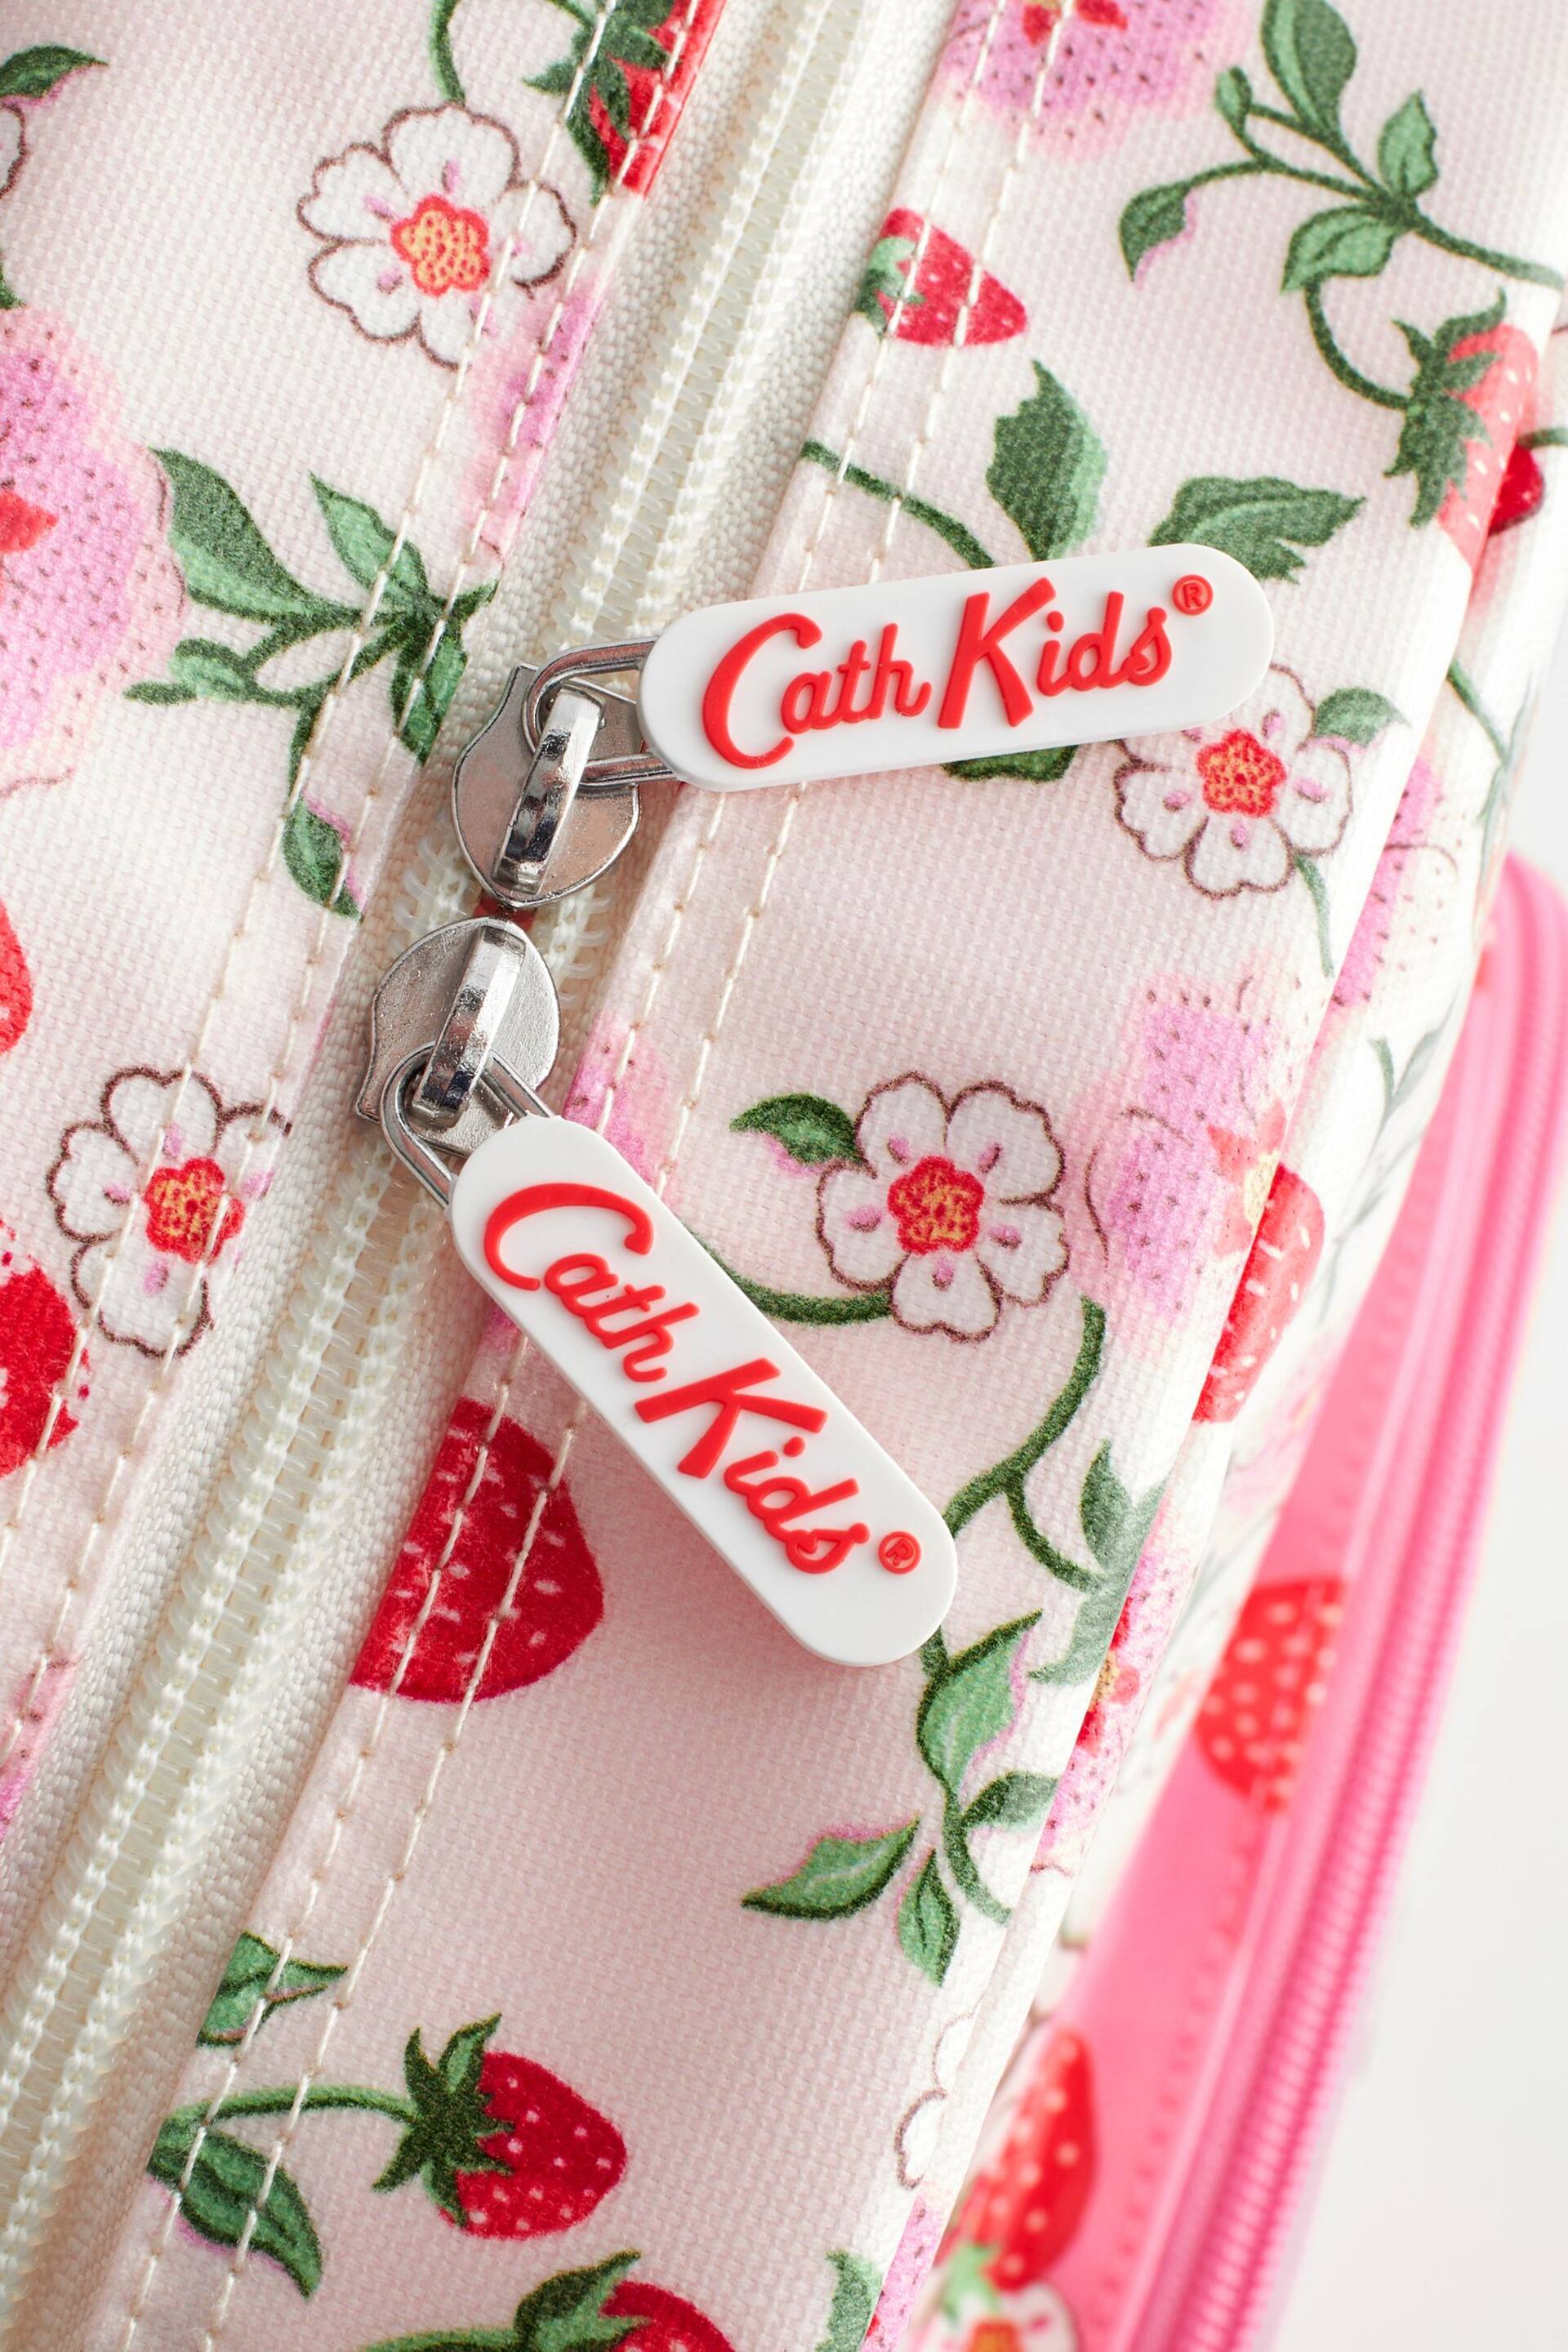 Cath Kidston Pink/White Floral Large Backpack - Image 10 of 12